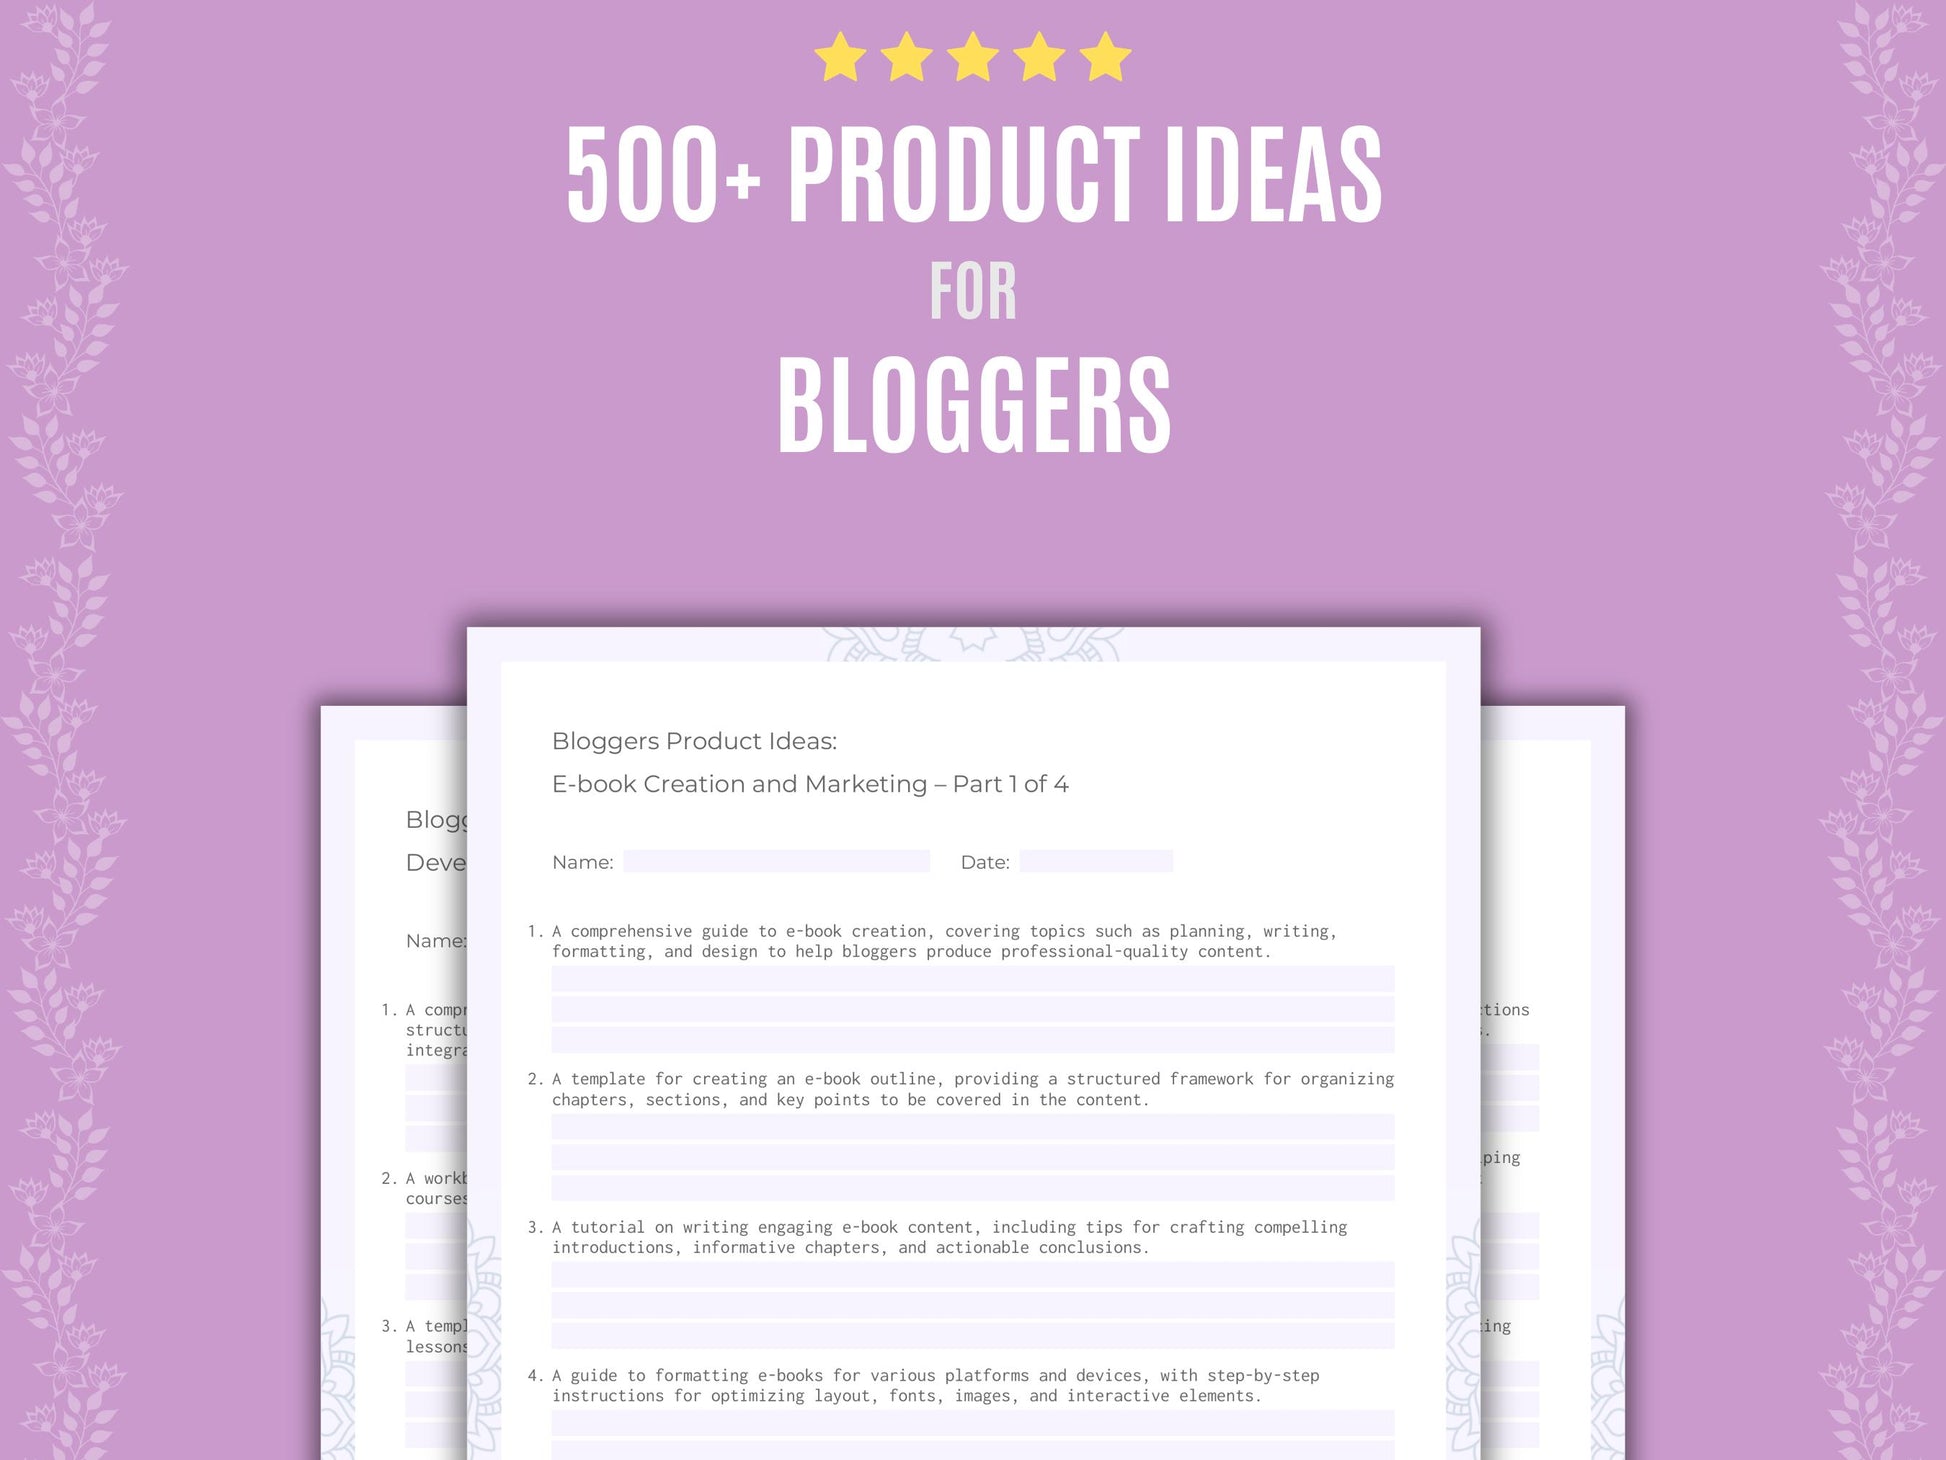 Bloggers Product Ideas Resource